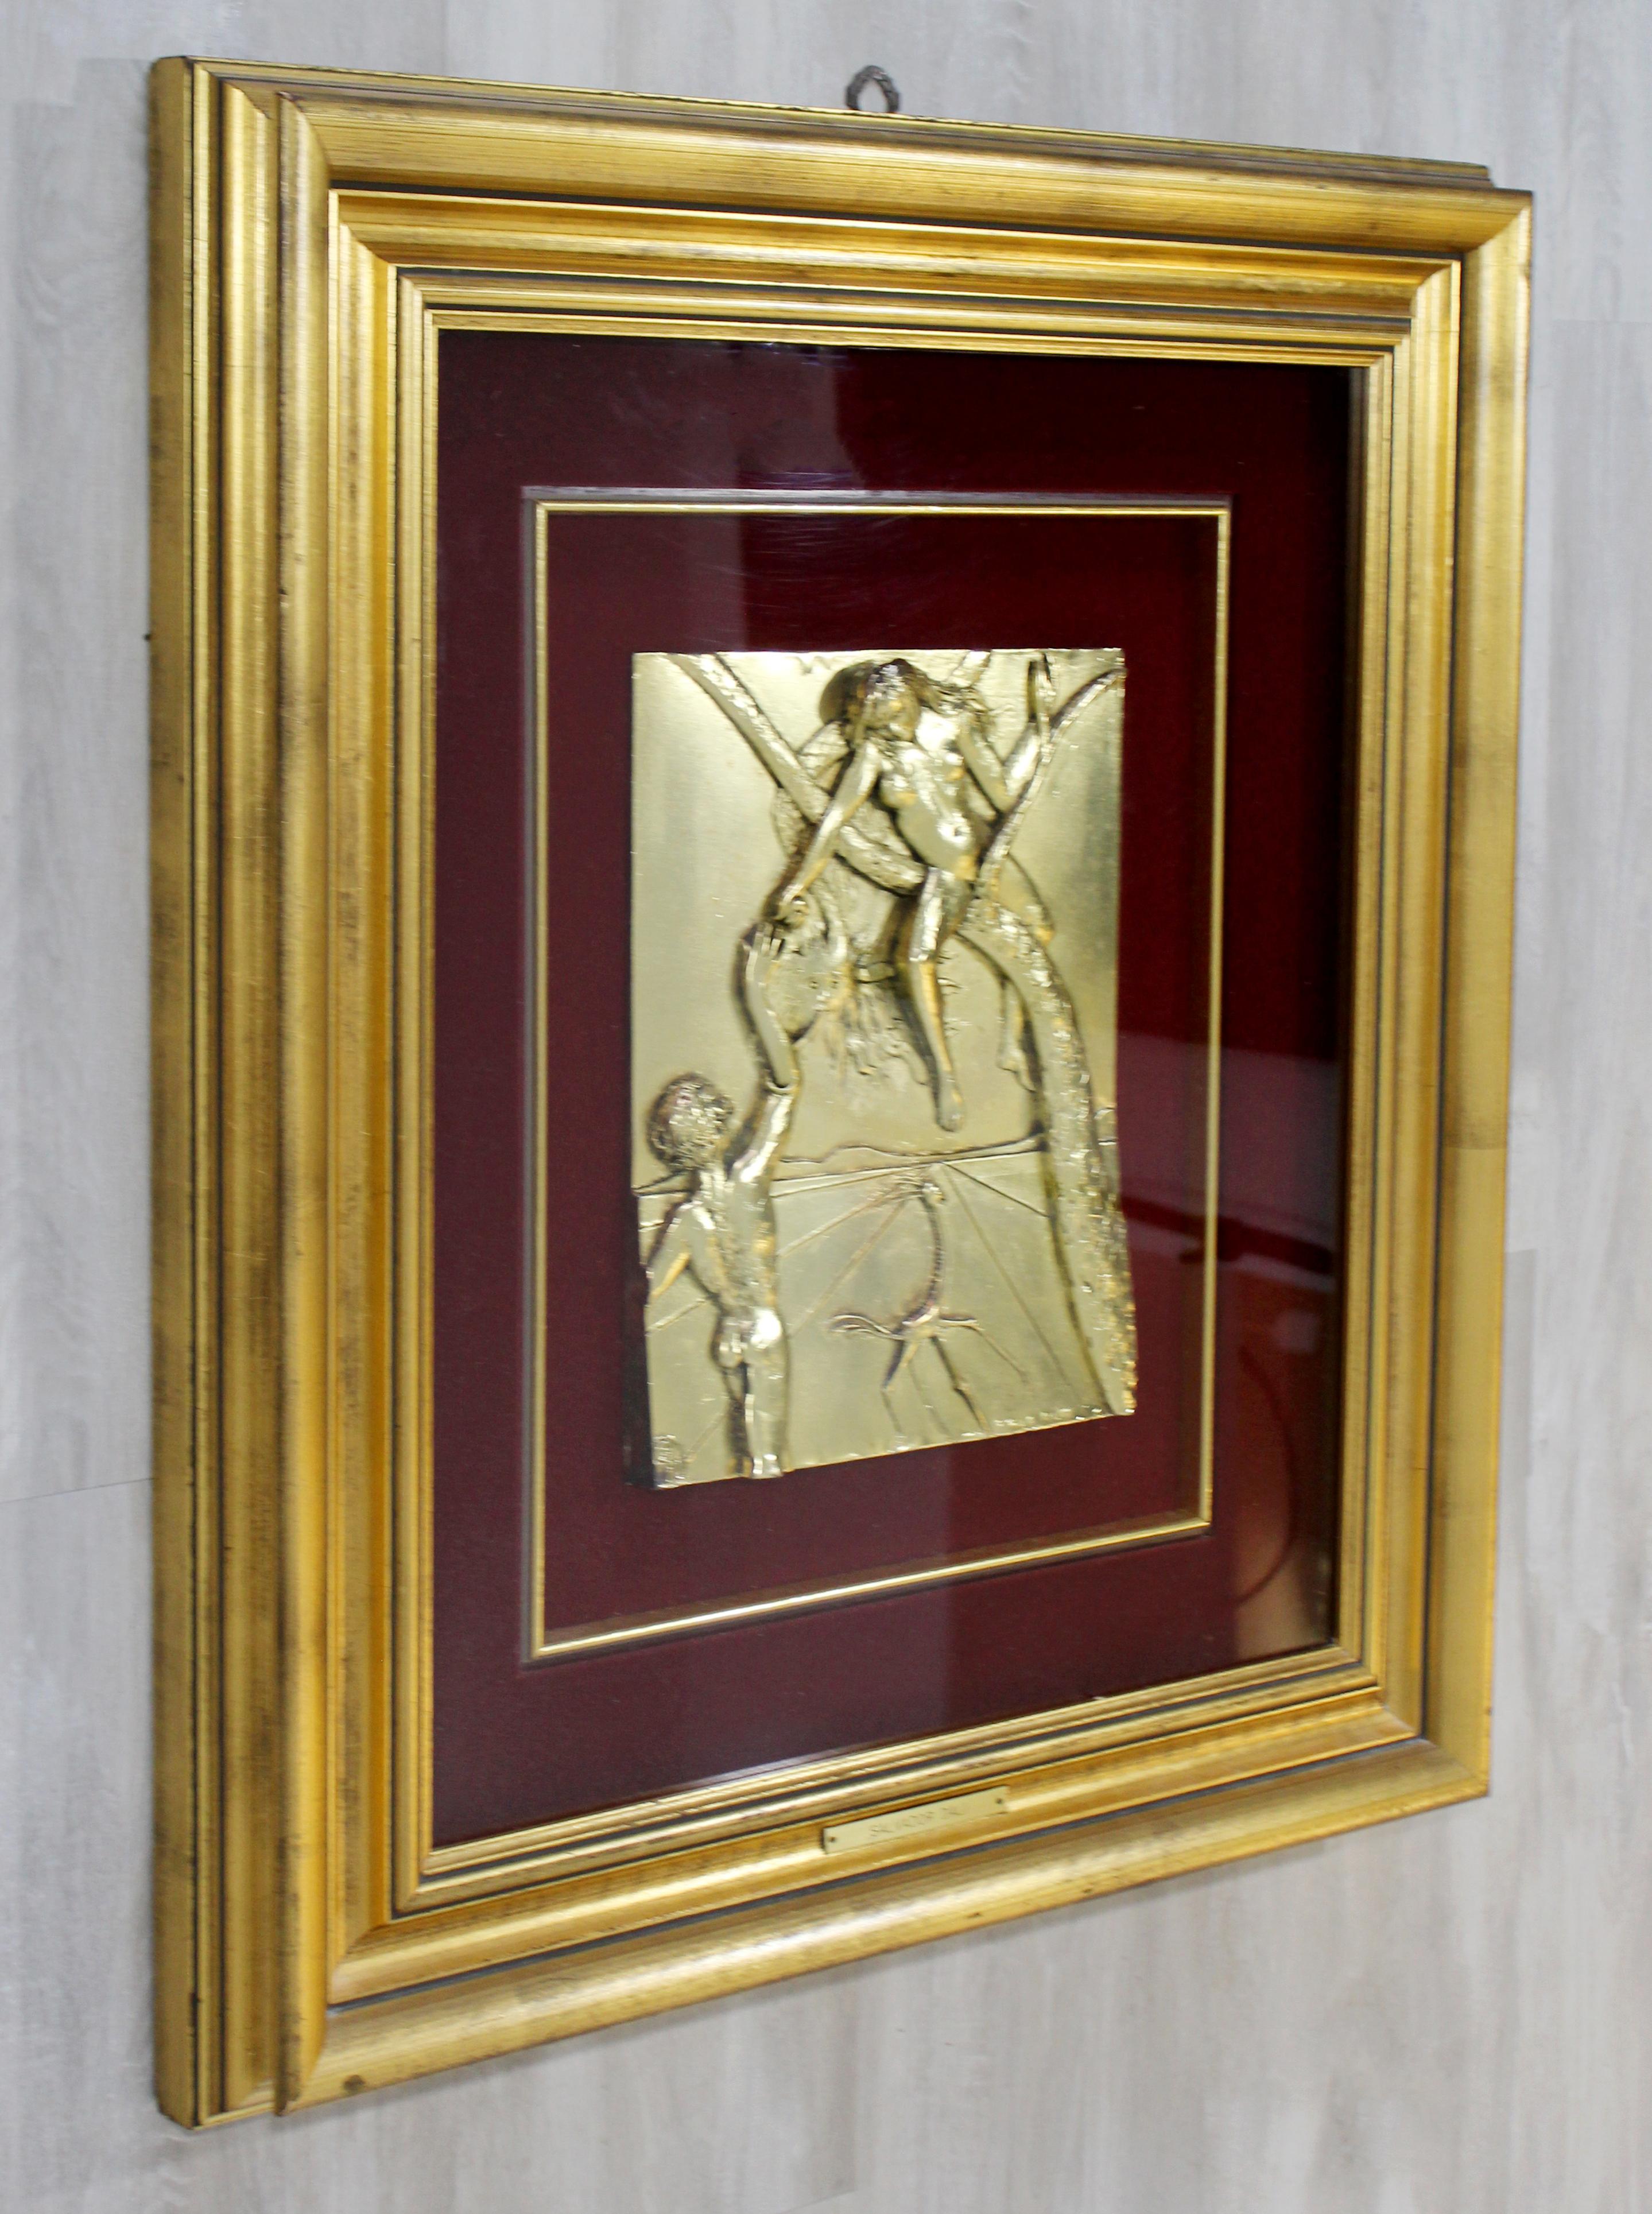 For your consideration is an attention grabbing, gold dipped sterling silver, bas relief wall sculpture, entitled 